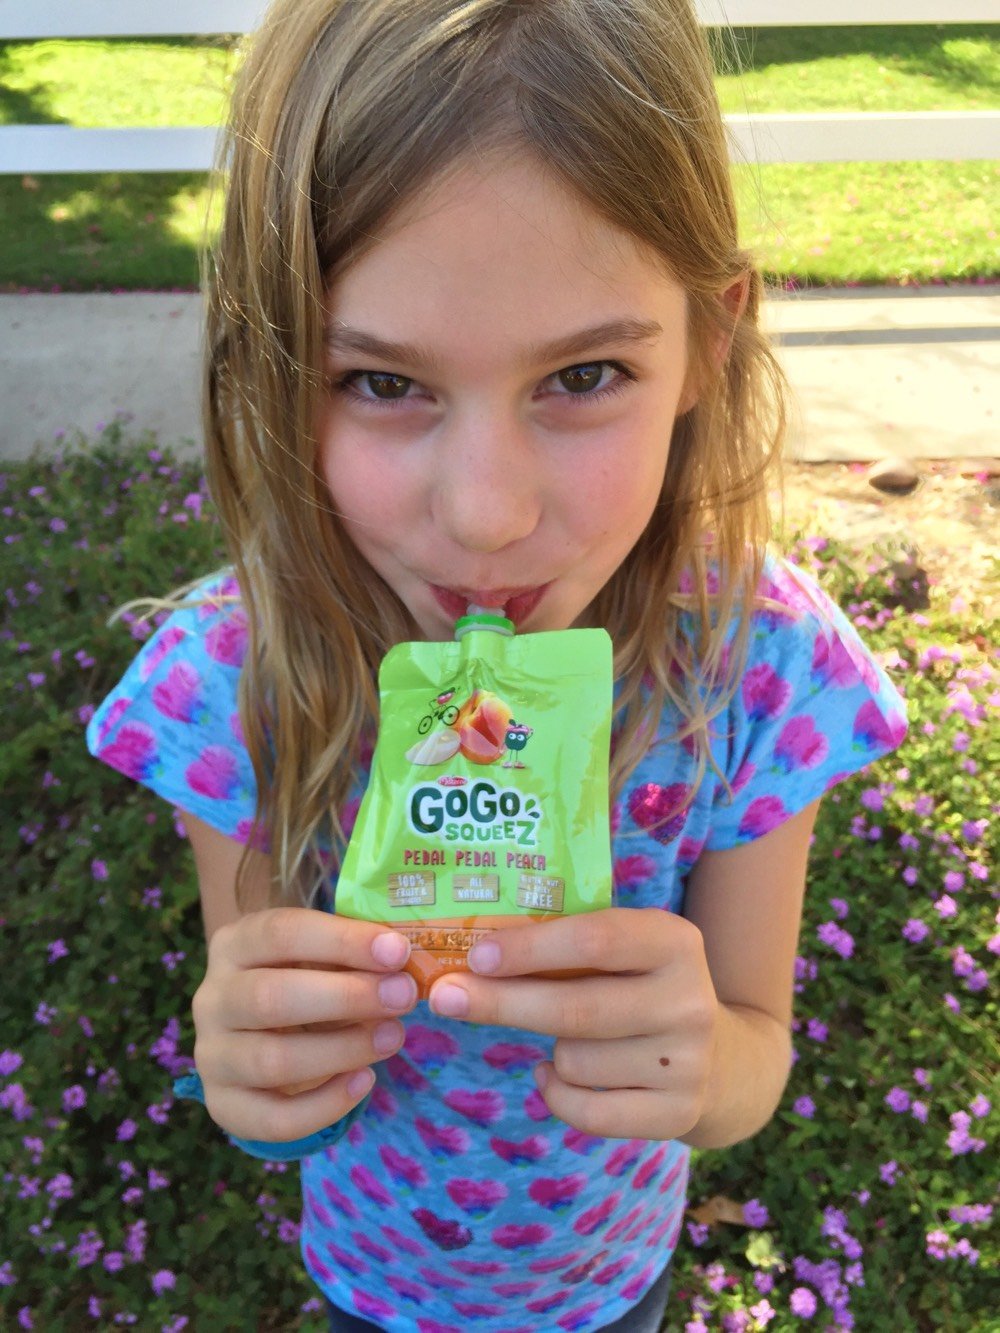 5 Easy Ways to Get Your Kids to Eat more Fruits and Veggies from weelicious.com